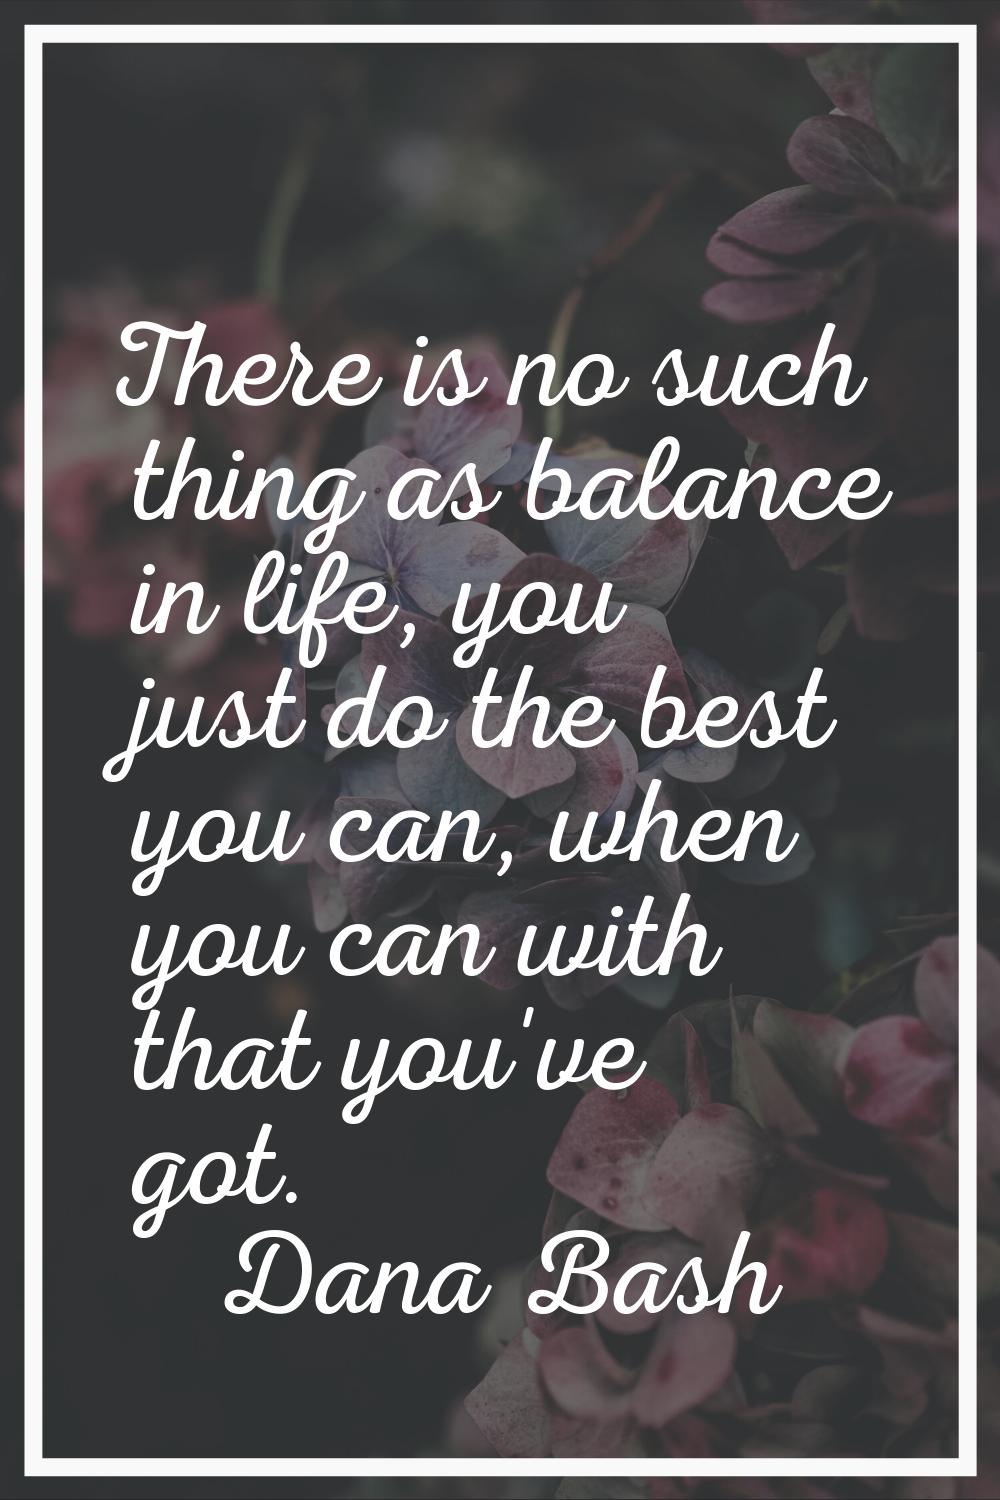 There is no such thing as balance in life, you just do the best you can, when you can with that you